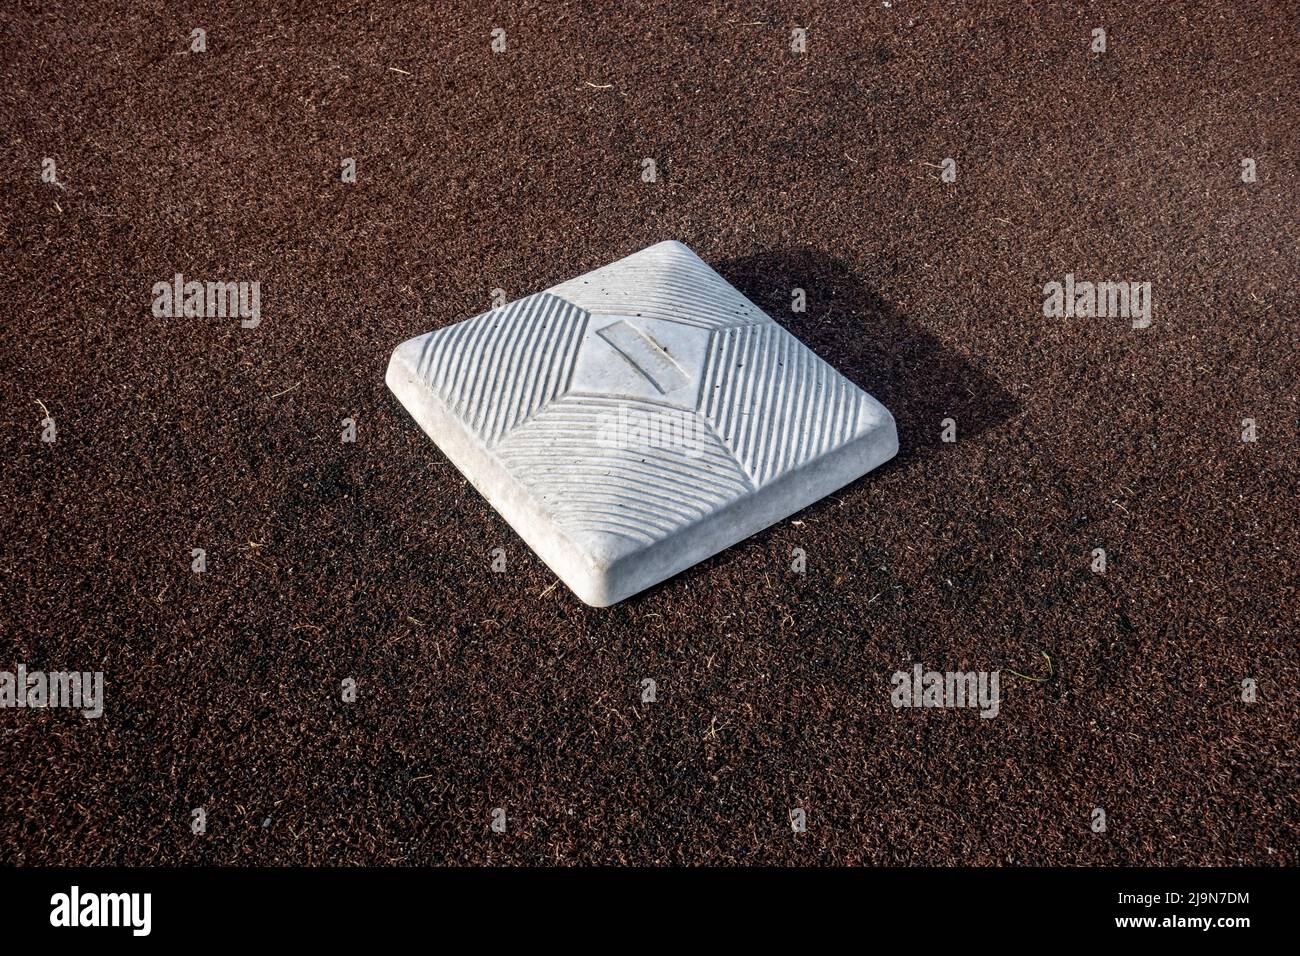 Top down, close up view of a base on a clean baseball field on a bright, sunny day Stock Photo